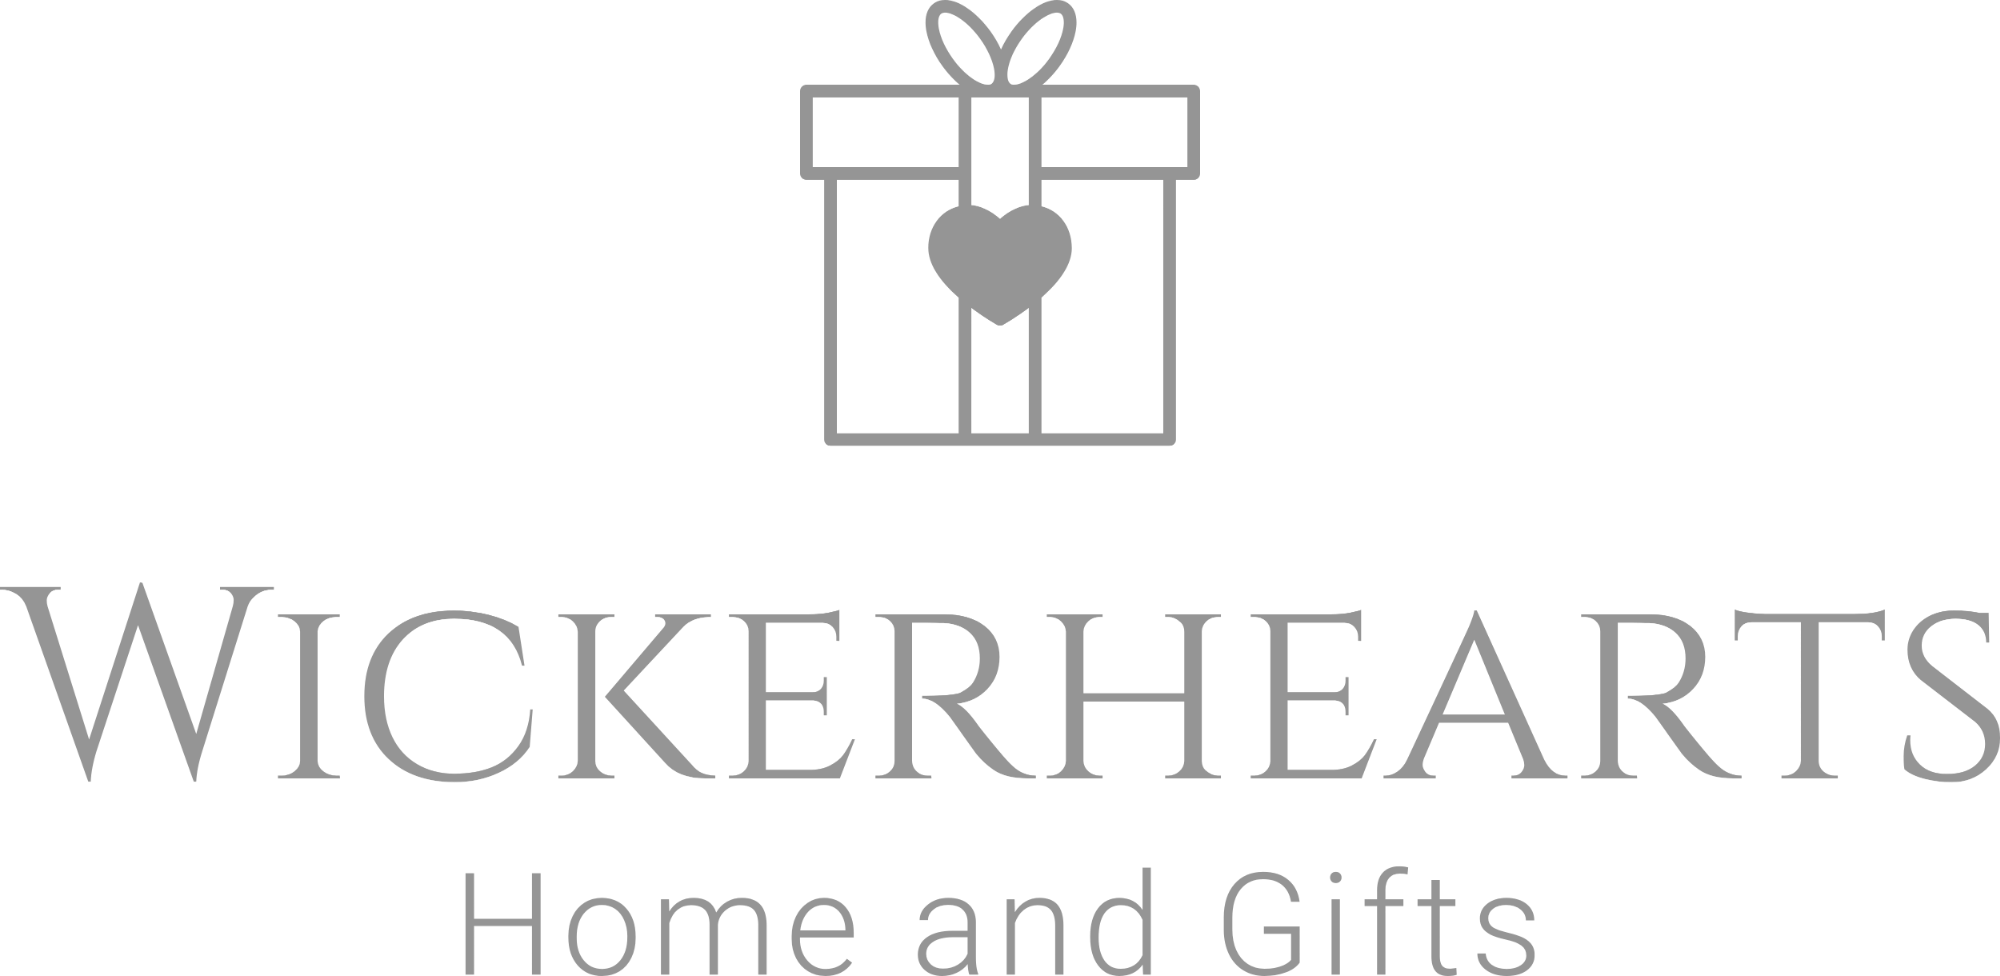 Wickerhearts Online Shop for Gifts and Home Decor